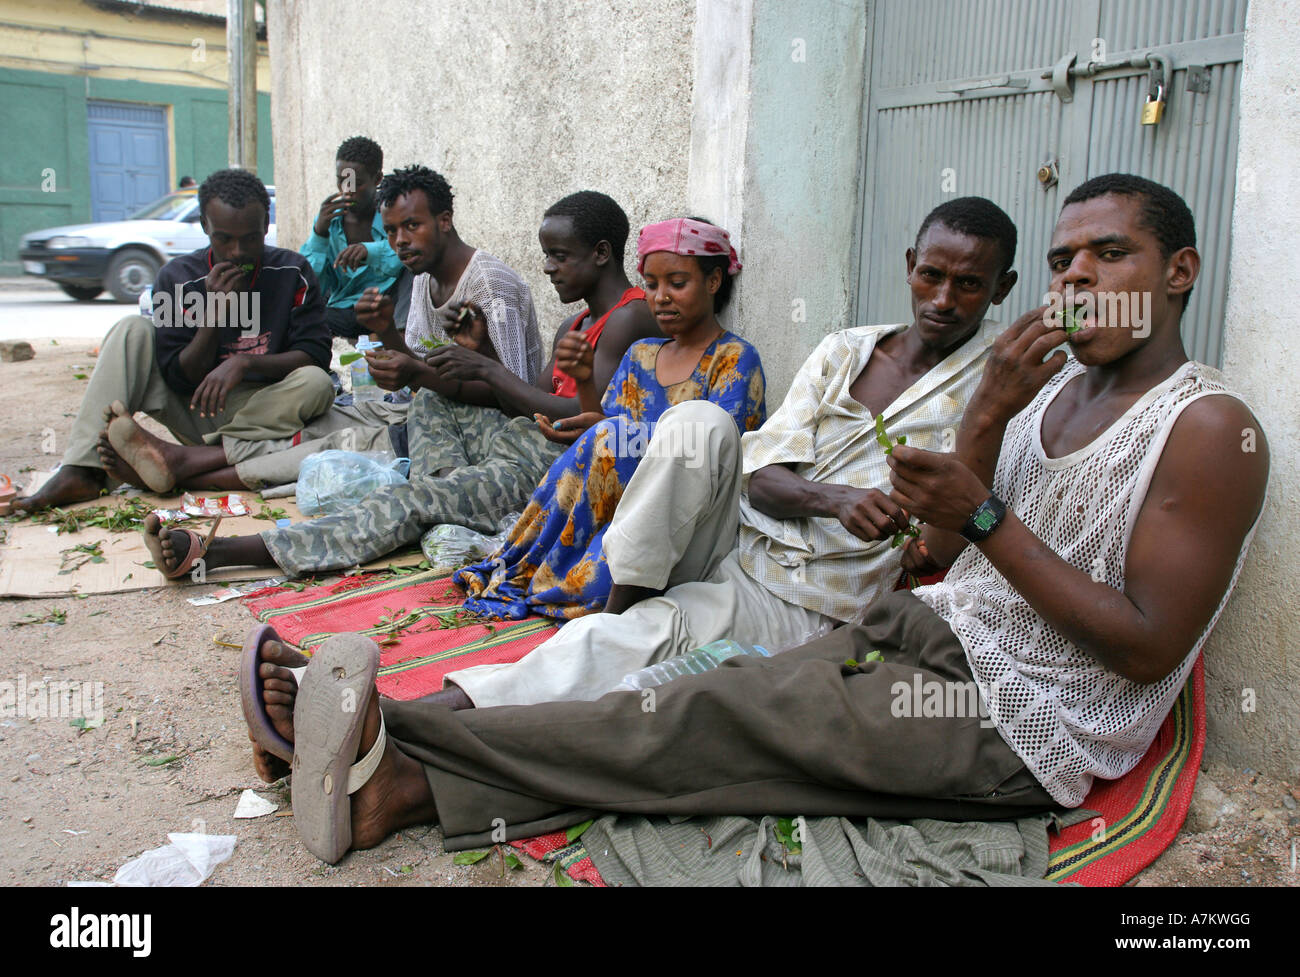 Ethiopia - men chewing chat in the streets of Dire Dawa Stock Photo